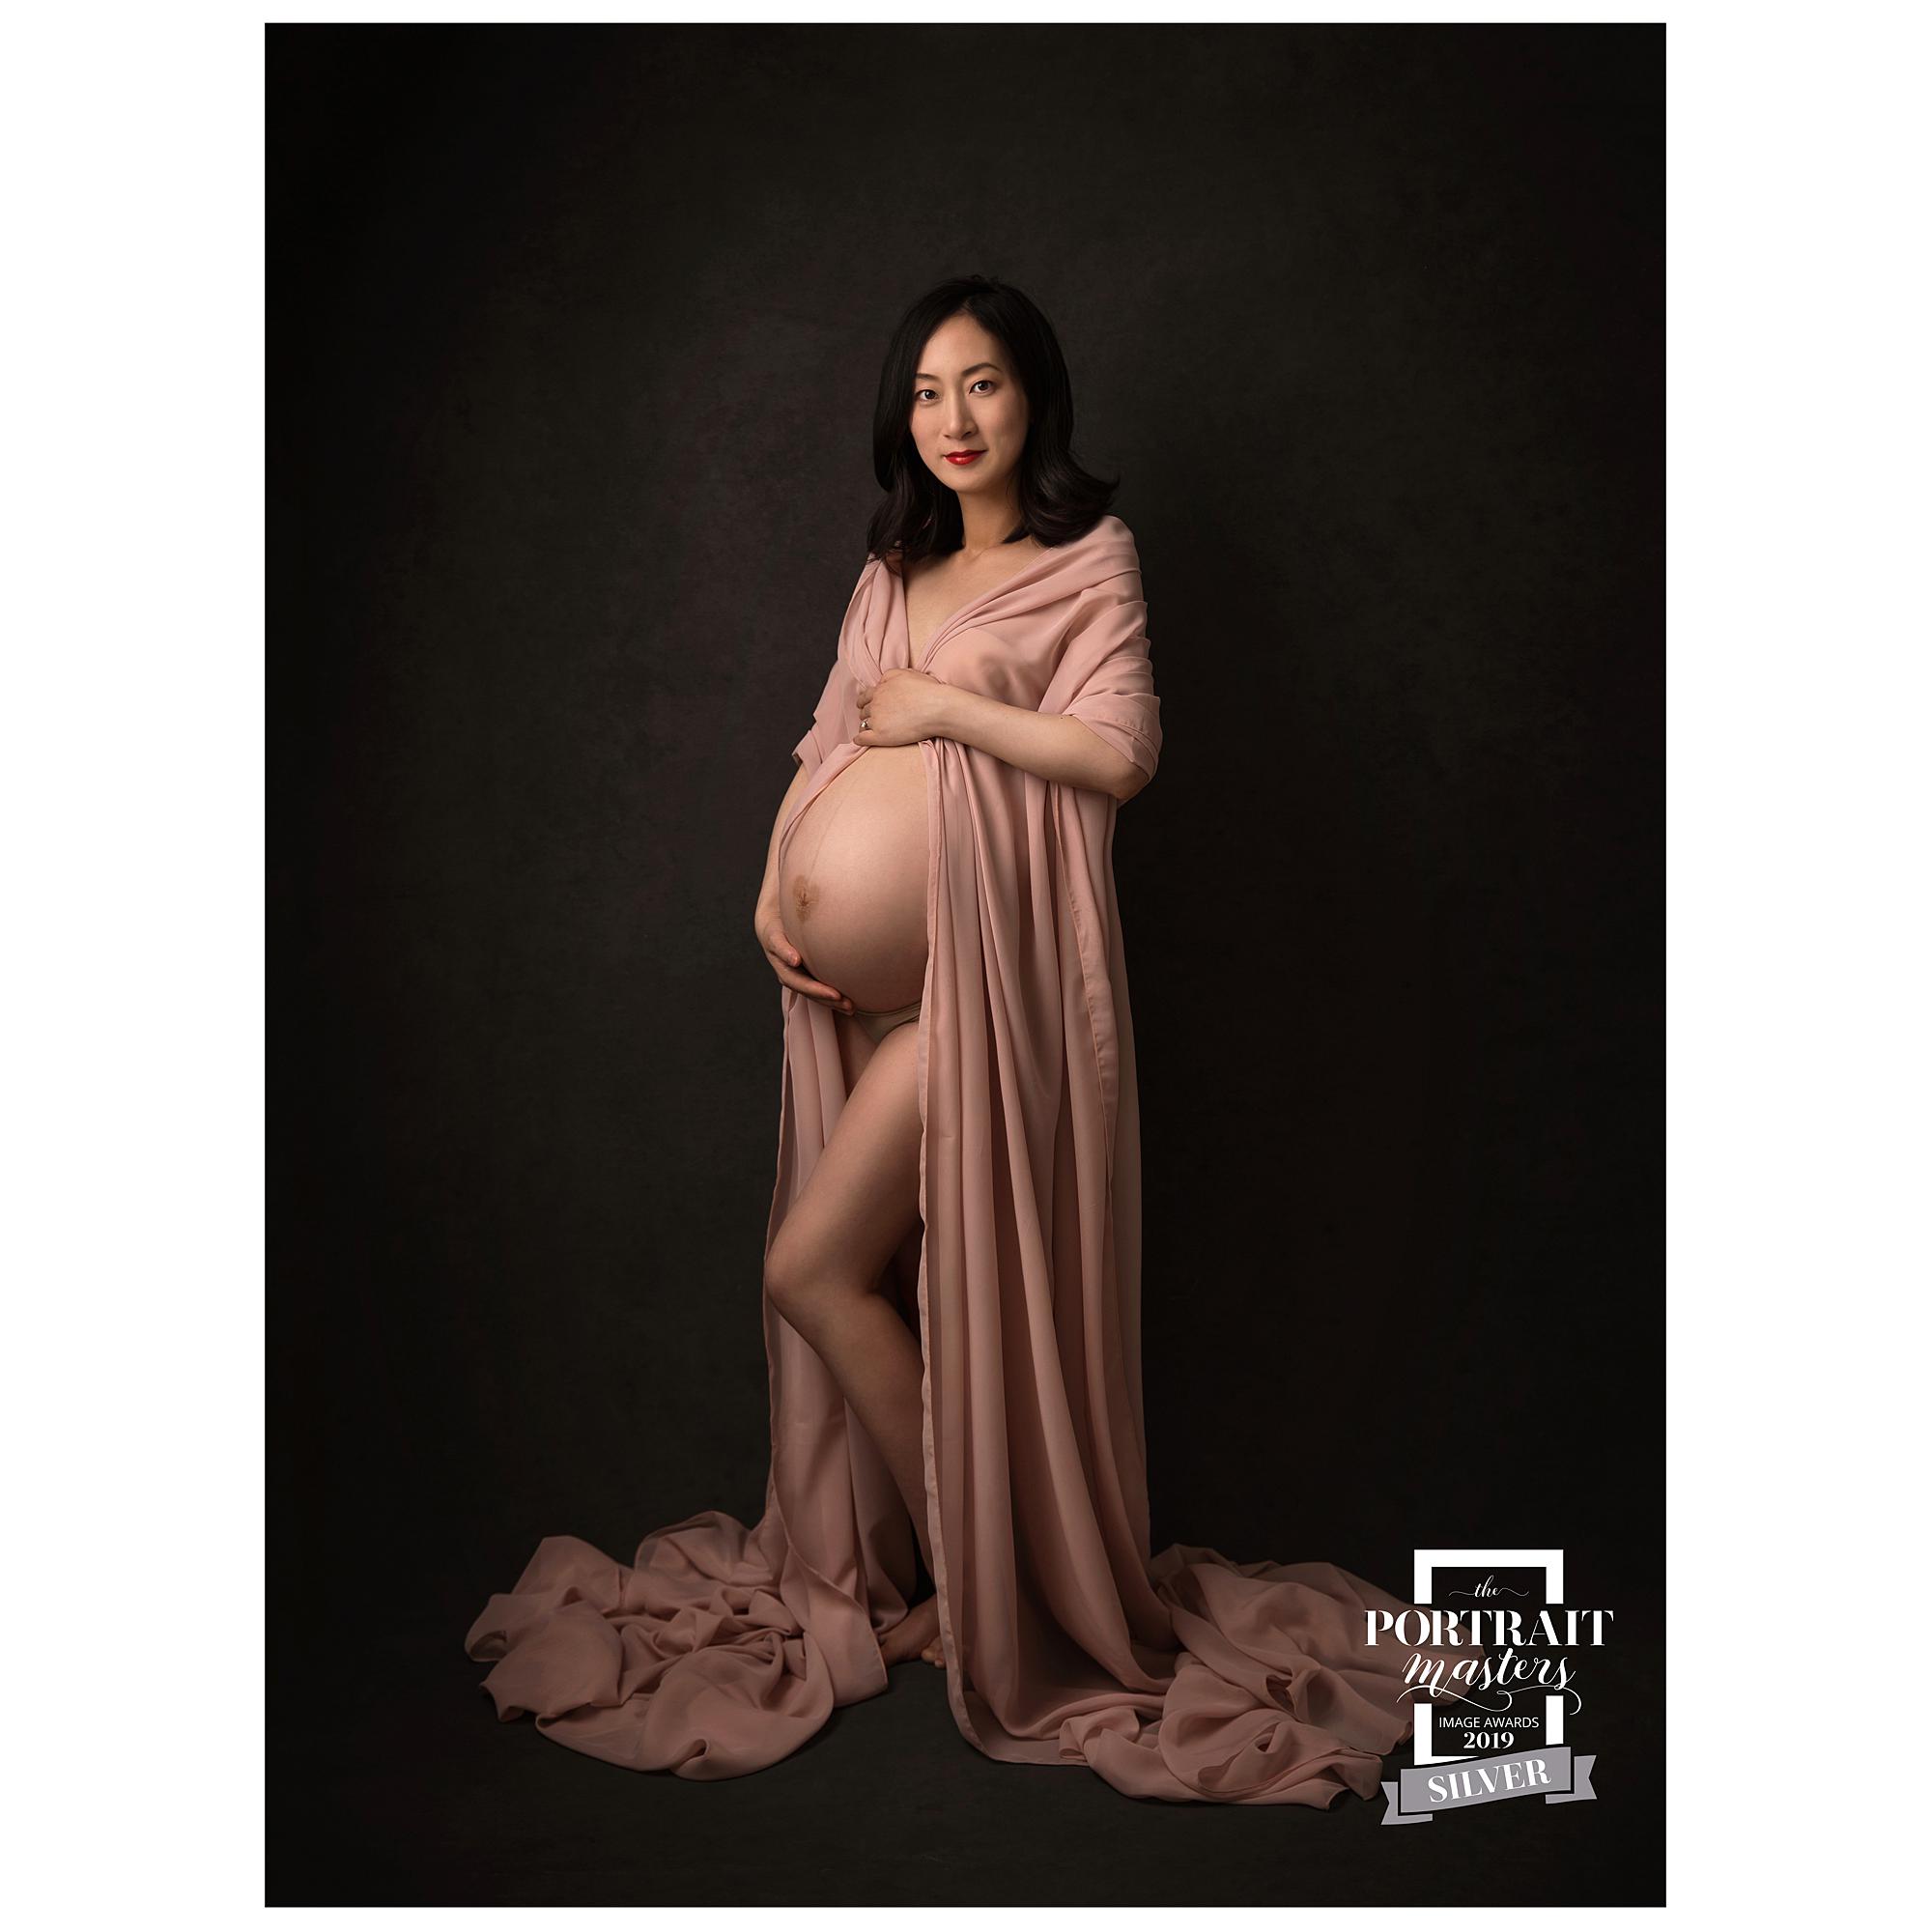 Pregnant woman posing in sheer pink material for a maternity photoshoot in Alison McKenny's Suffolk studio